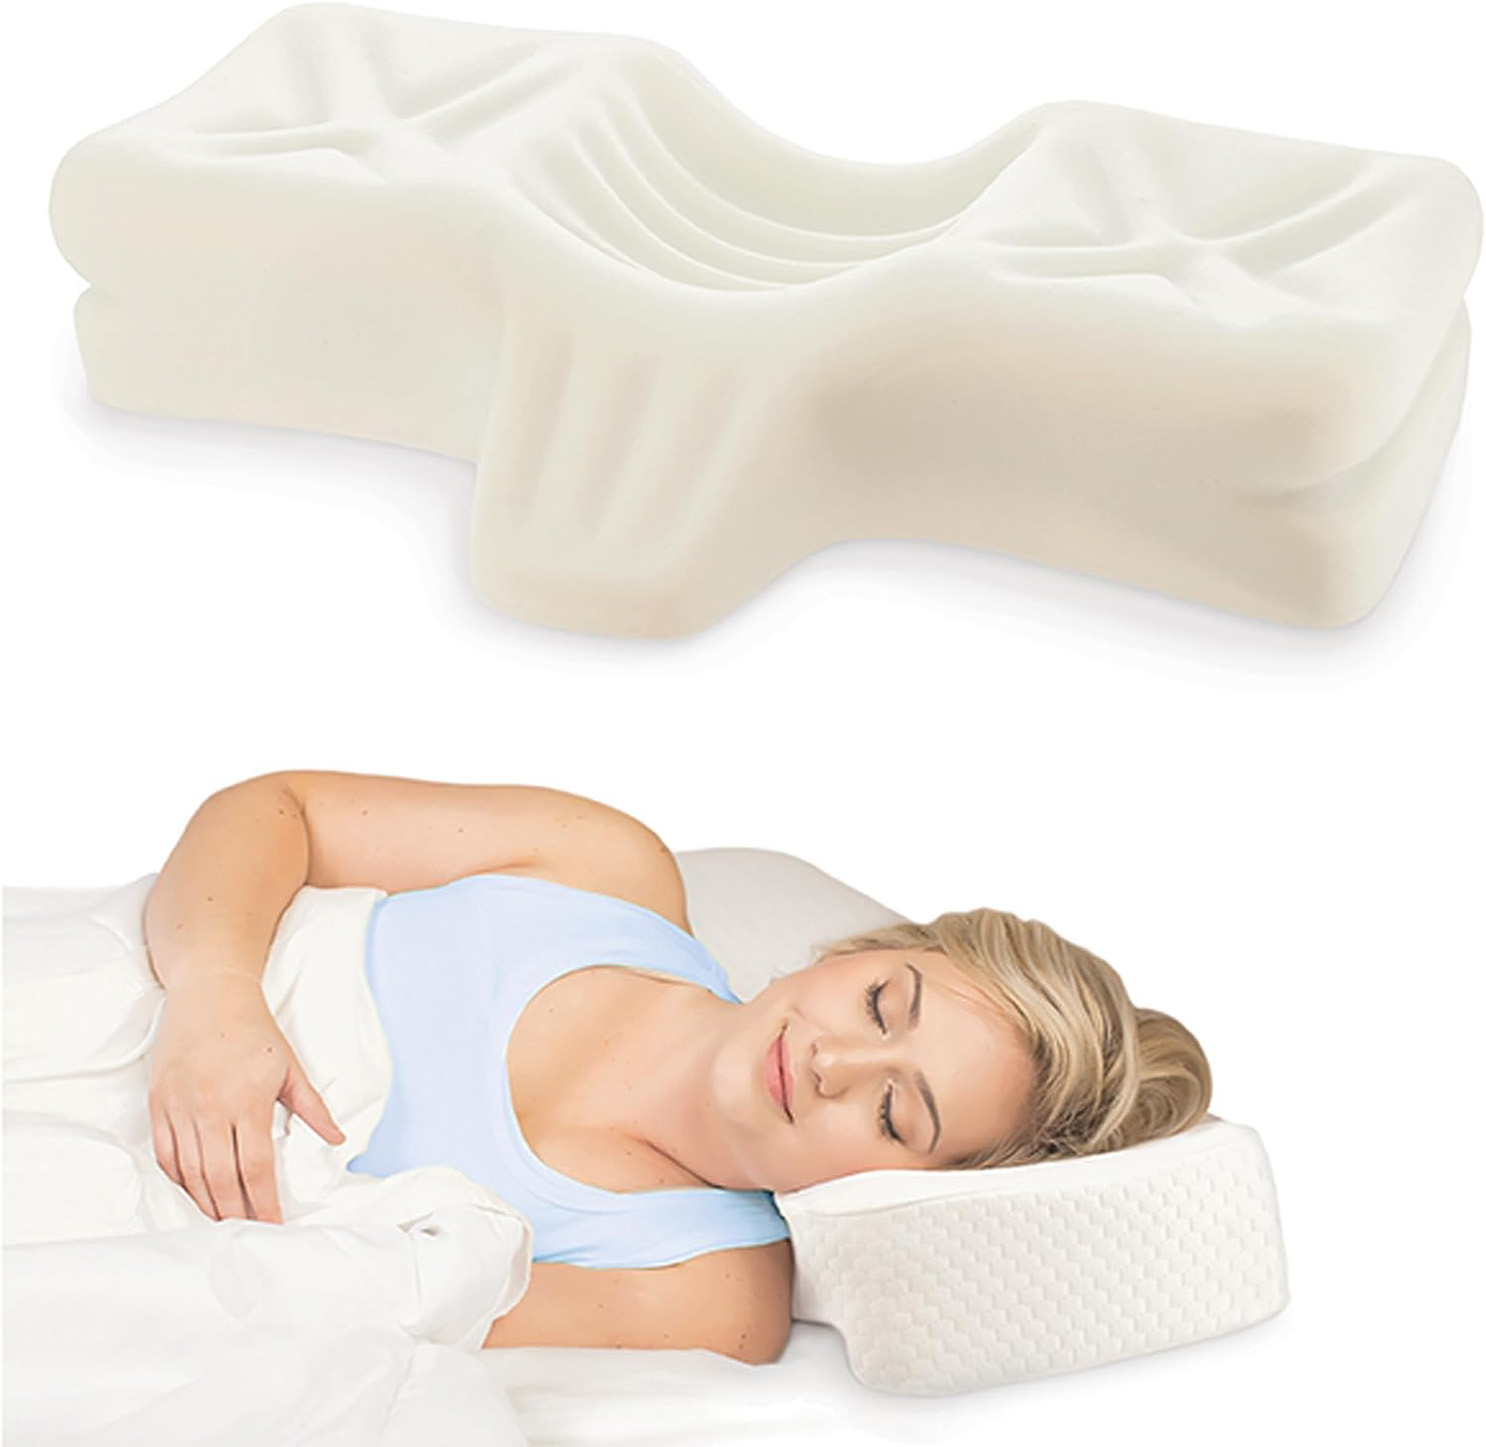 Therapeutica Cervical Orthopedic Foam Sleeping Pillow